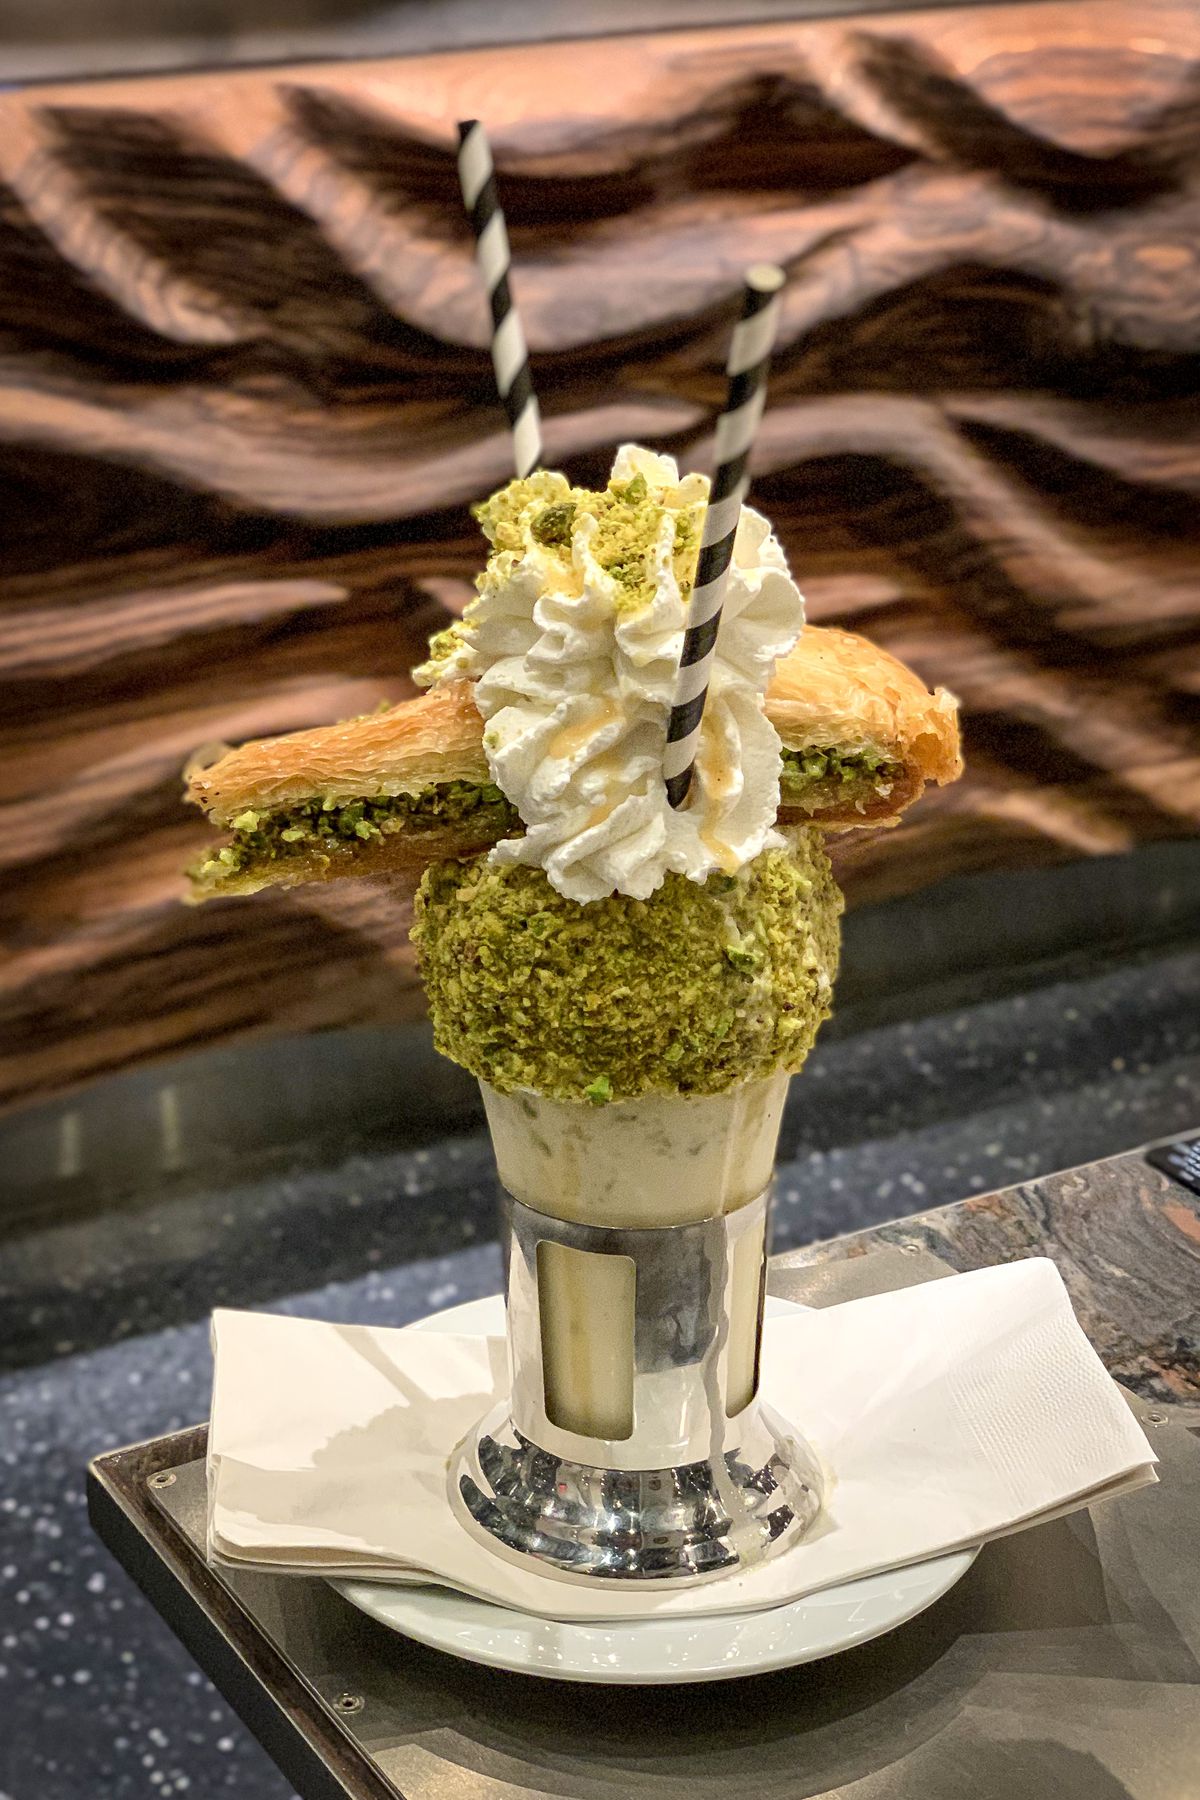 A vertical photo of a shake with whipped cream, two straws, and a triangle of baklava on top.